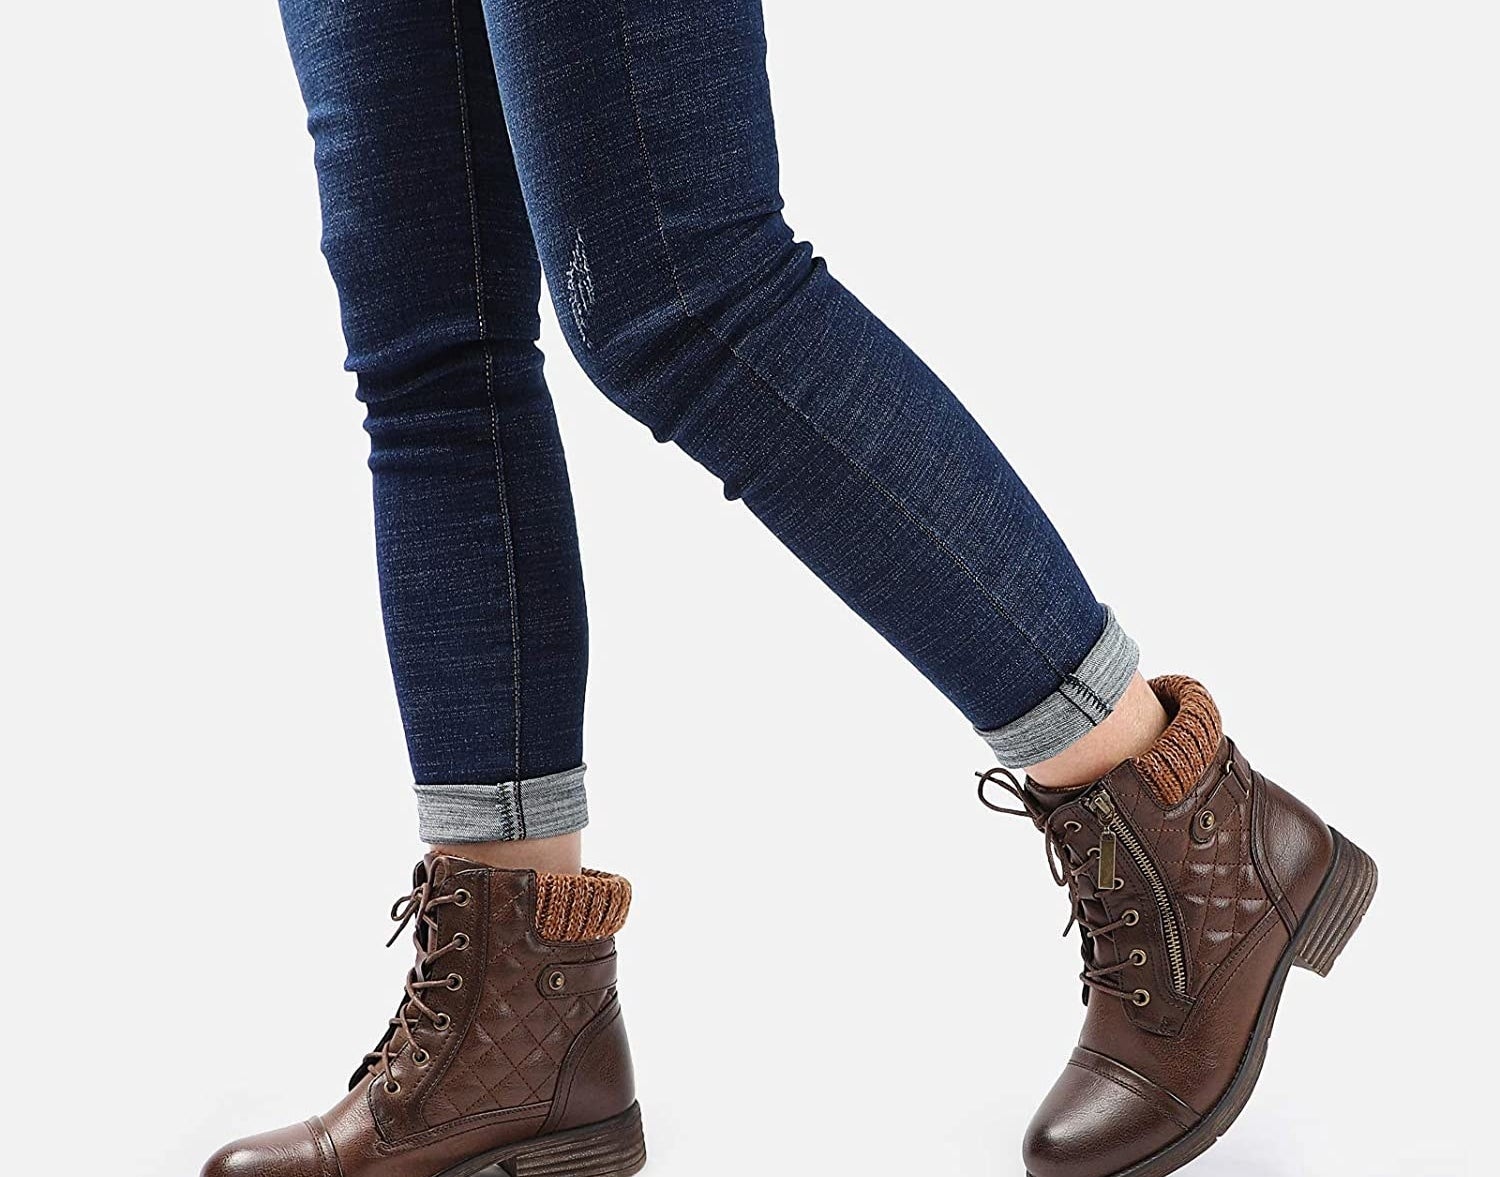 Model wearing the brown boots, which have a quilted side panel and elastic back